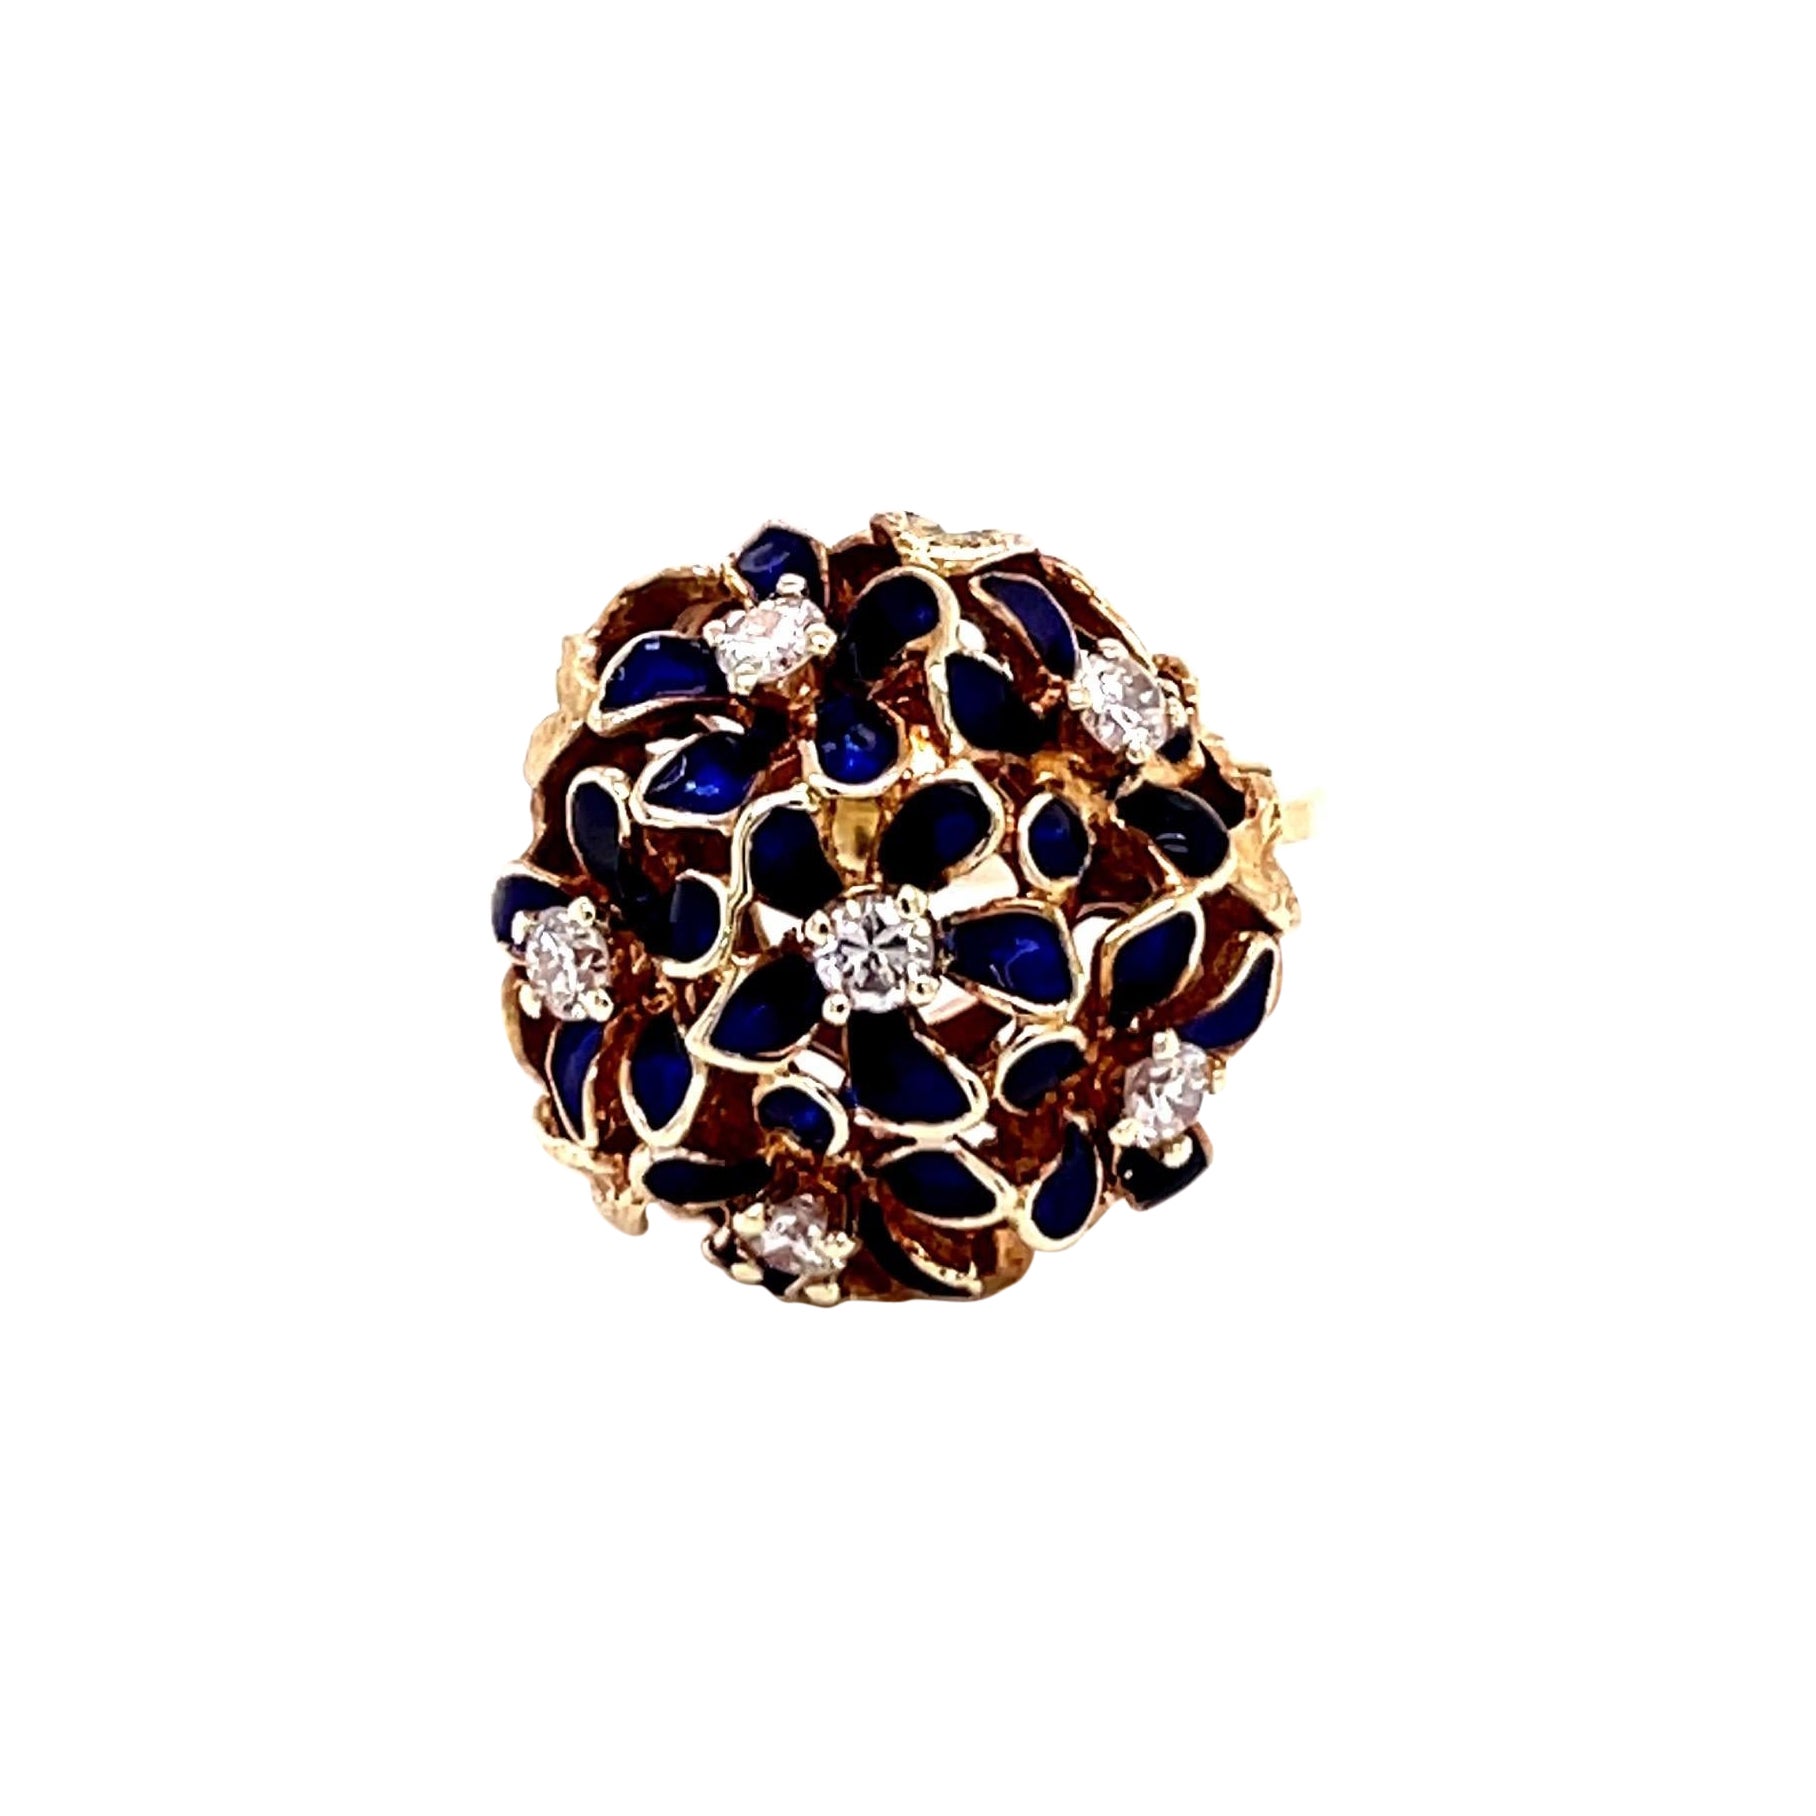 Vintage 14K Yellow Gold Flower Ring with Blue Enamel and Diamonds 